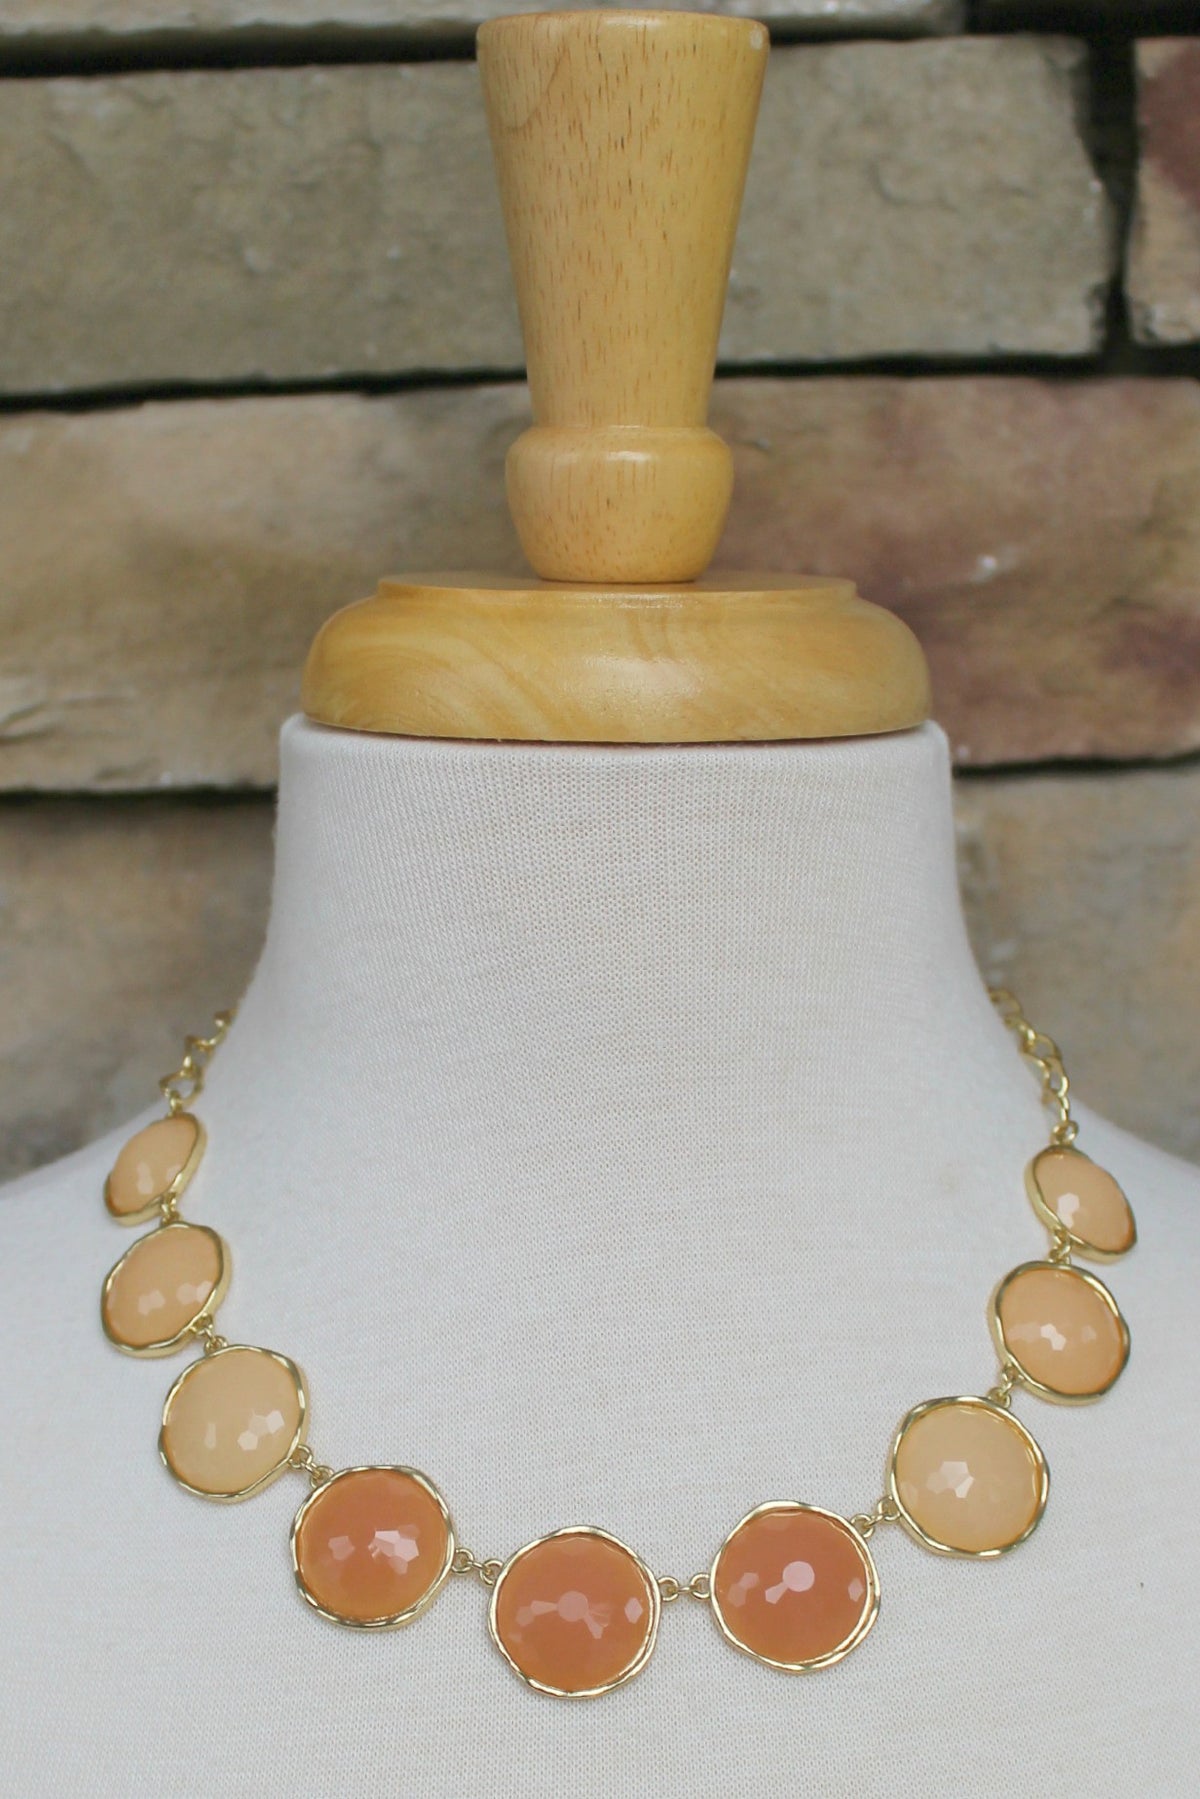 Blended Tone Necklace, Nude